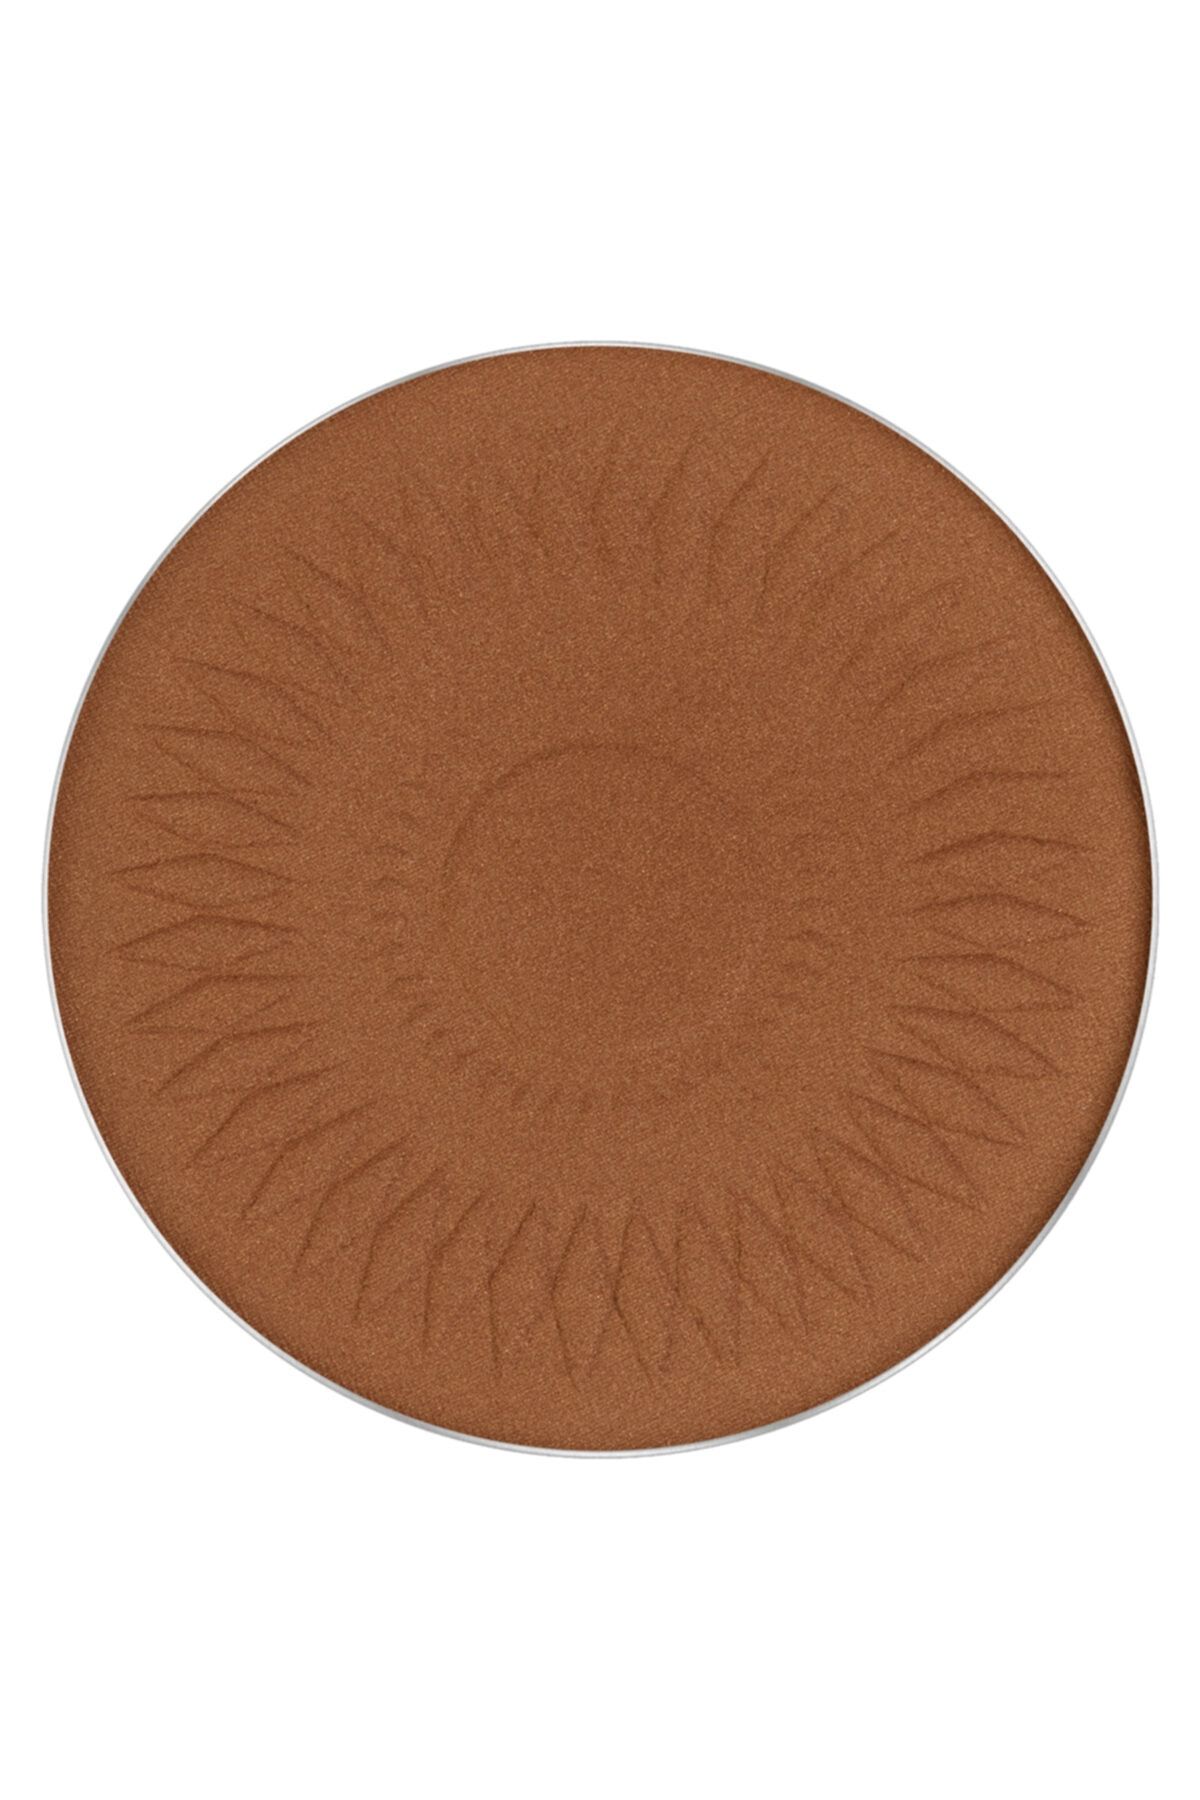 Inglot Fr Sys Always The Sun Glow Face Bronzer 703